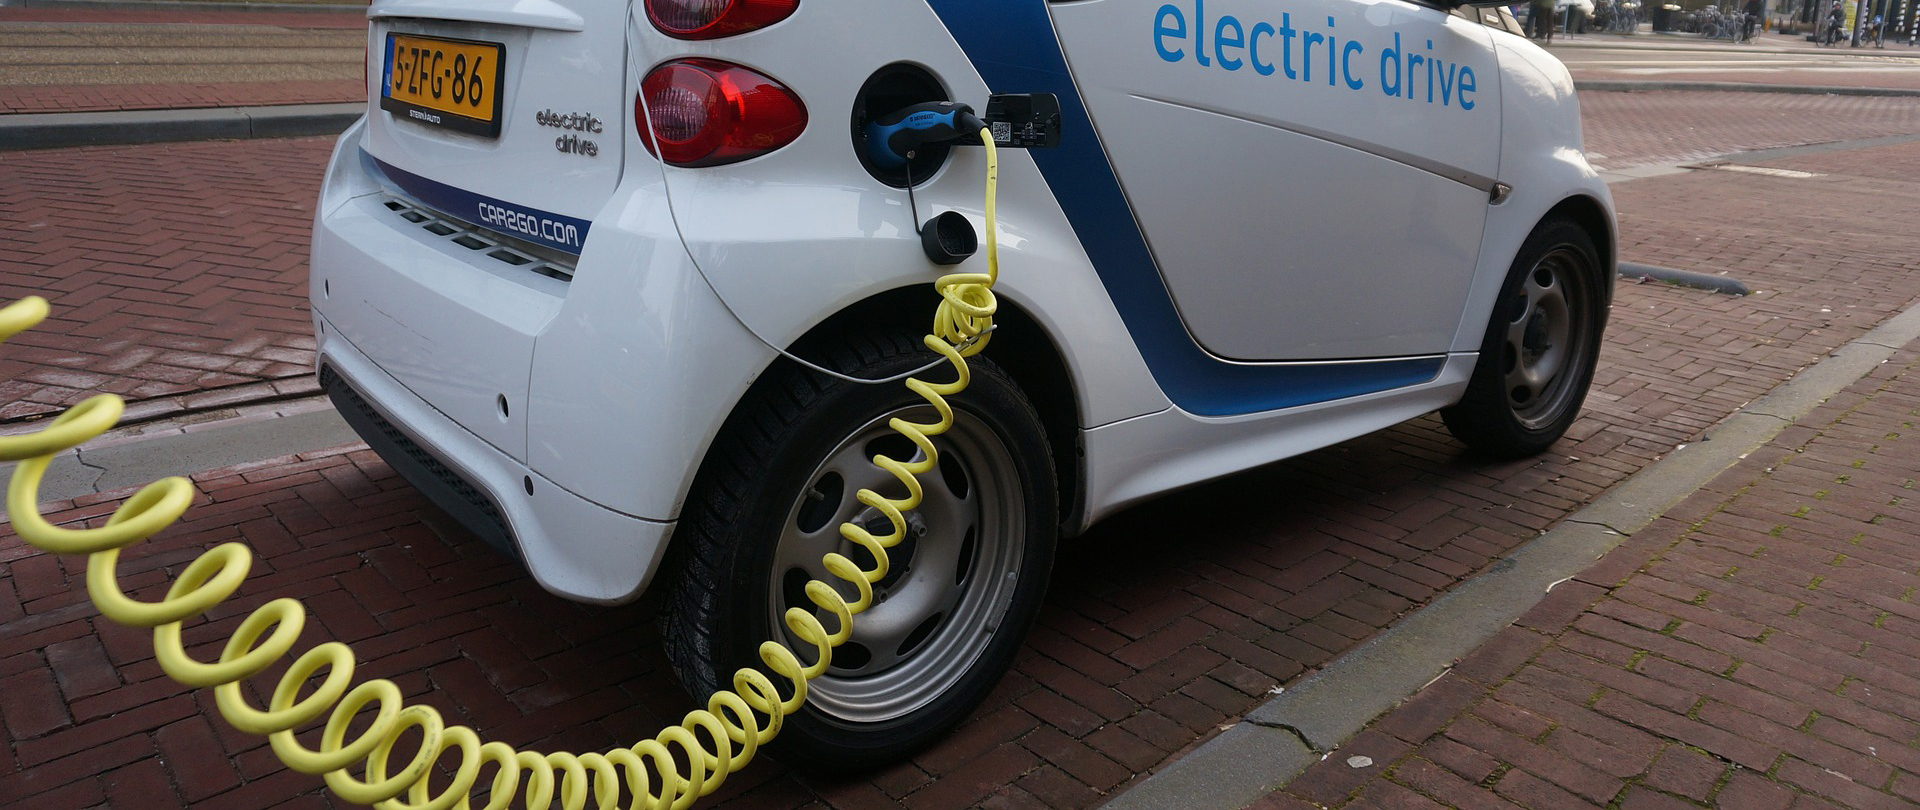 Podcast Driving electric vehicle policy Policy Forum